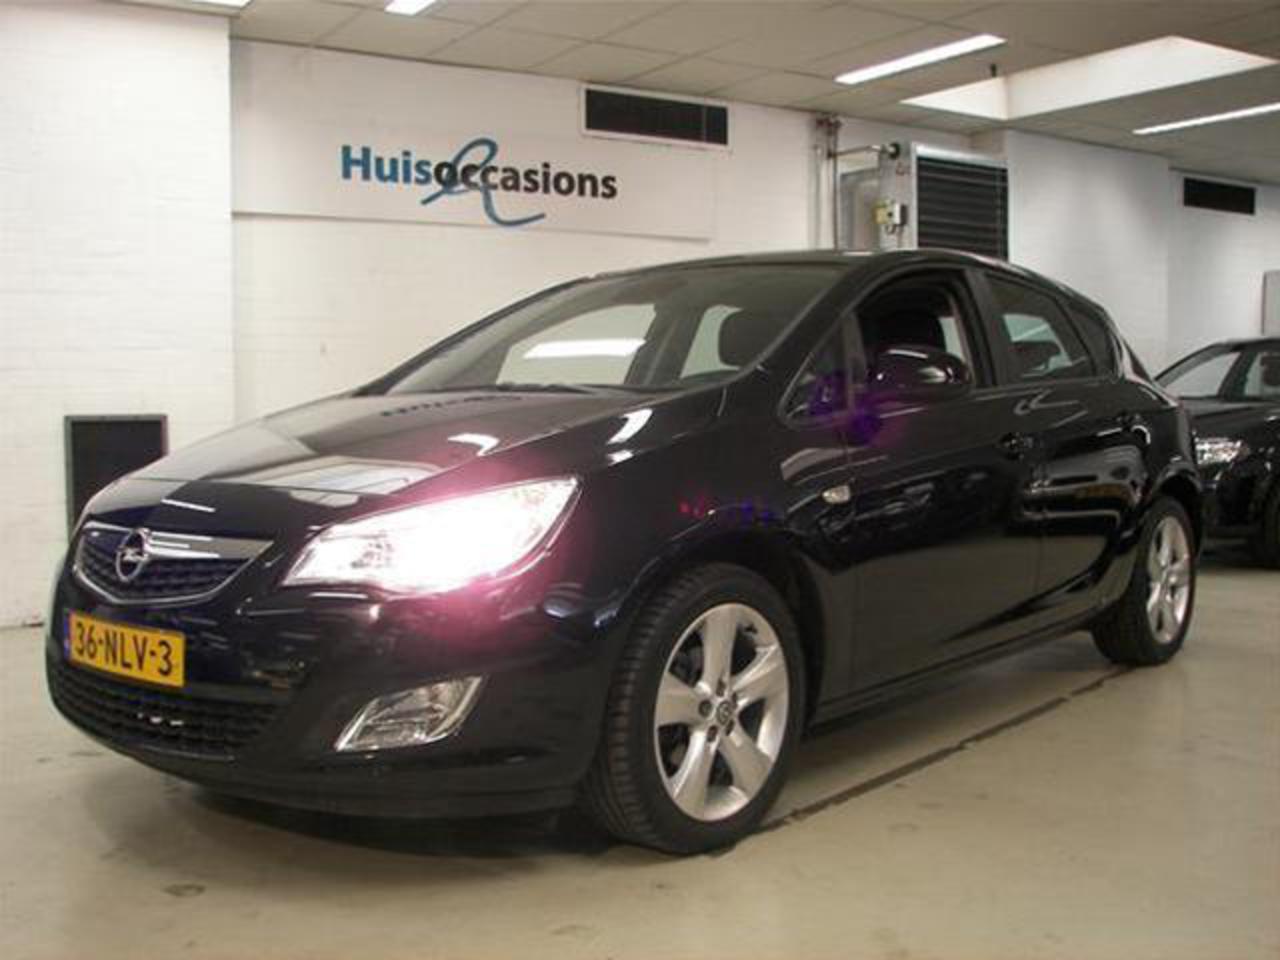 Opel Astra GL 14 Hatchback. View Download Wallpaper. 640x480. Comments